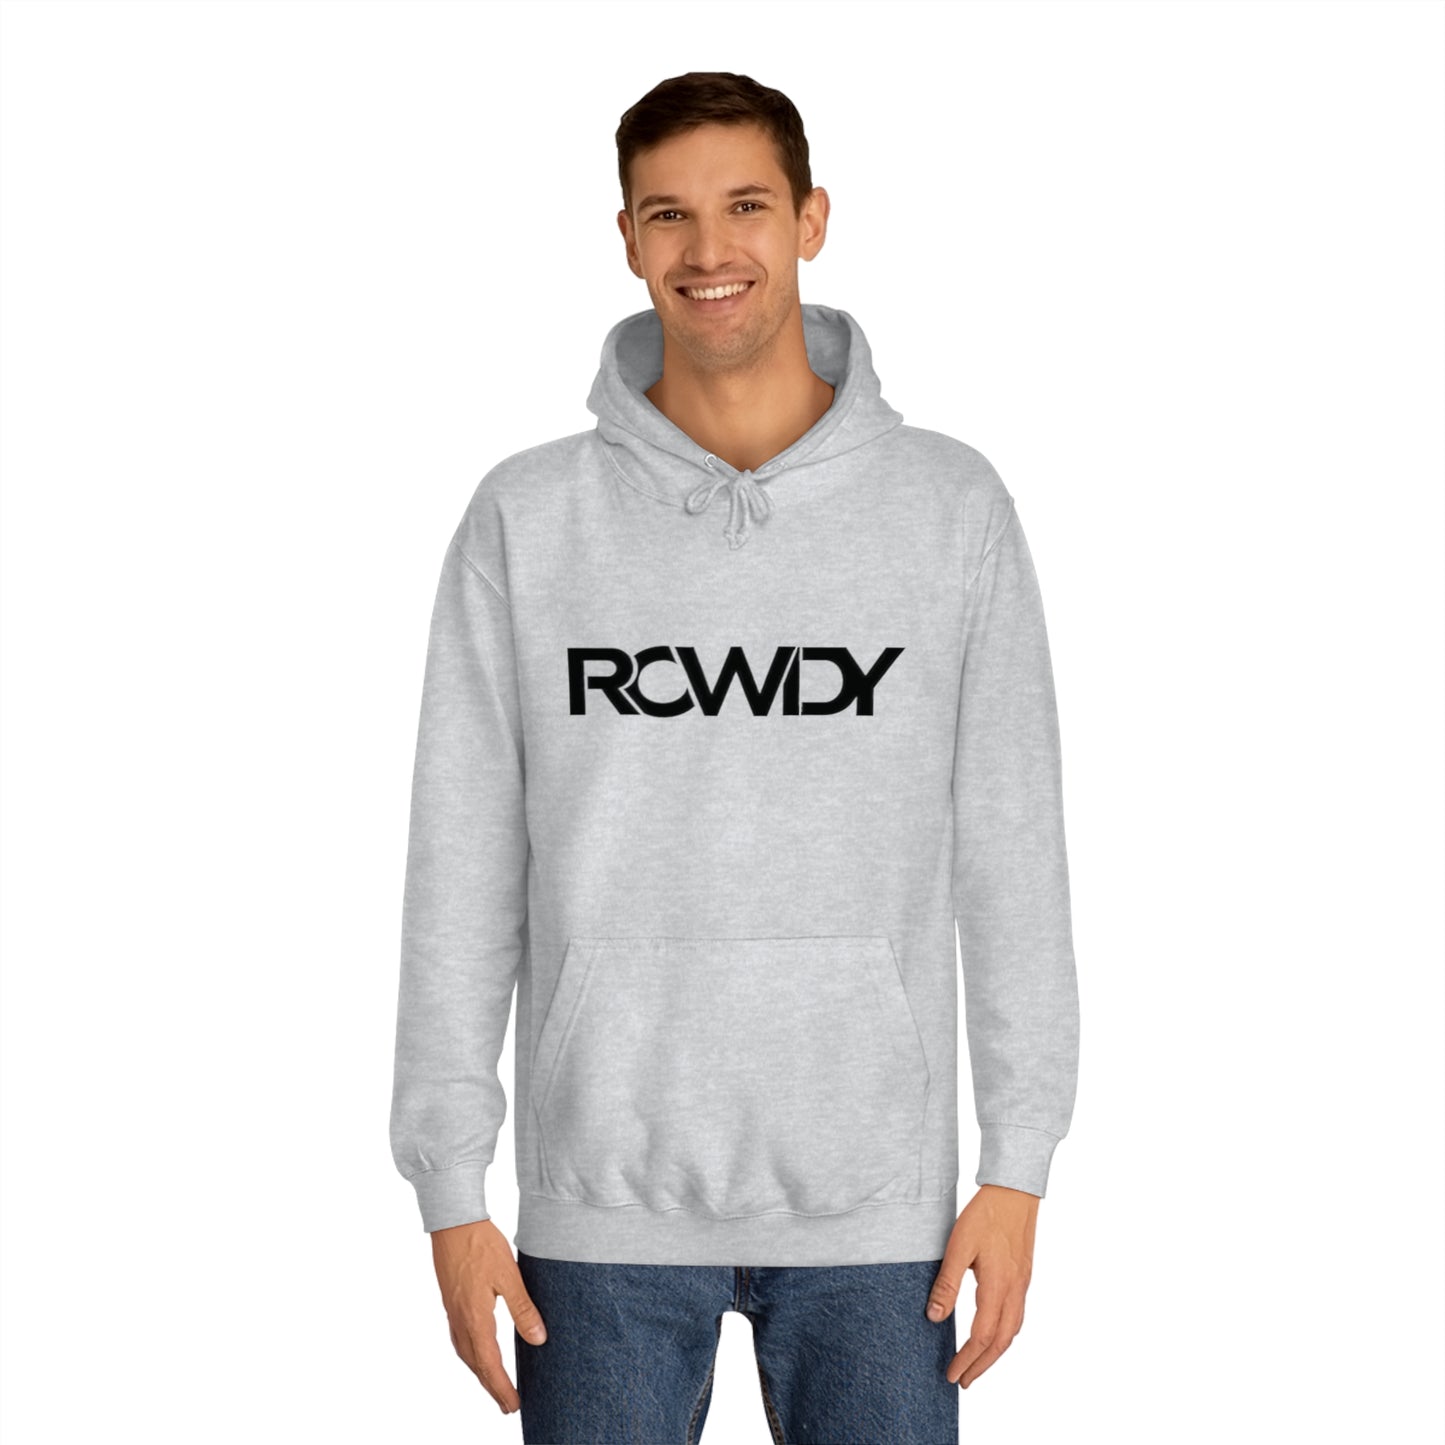 Rowdy College Style Hoodie